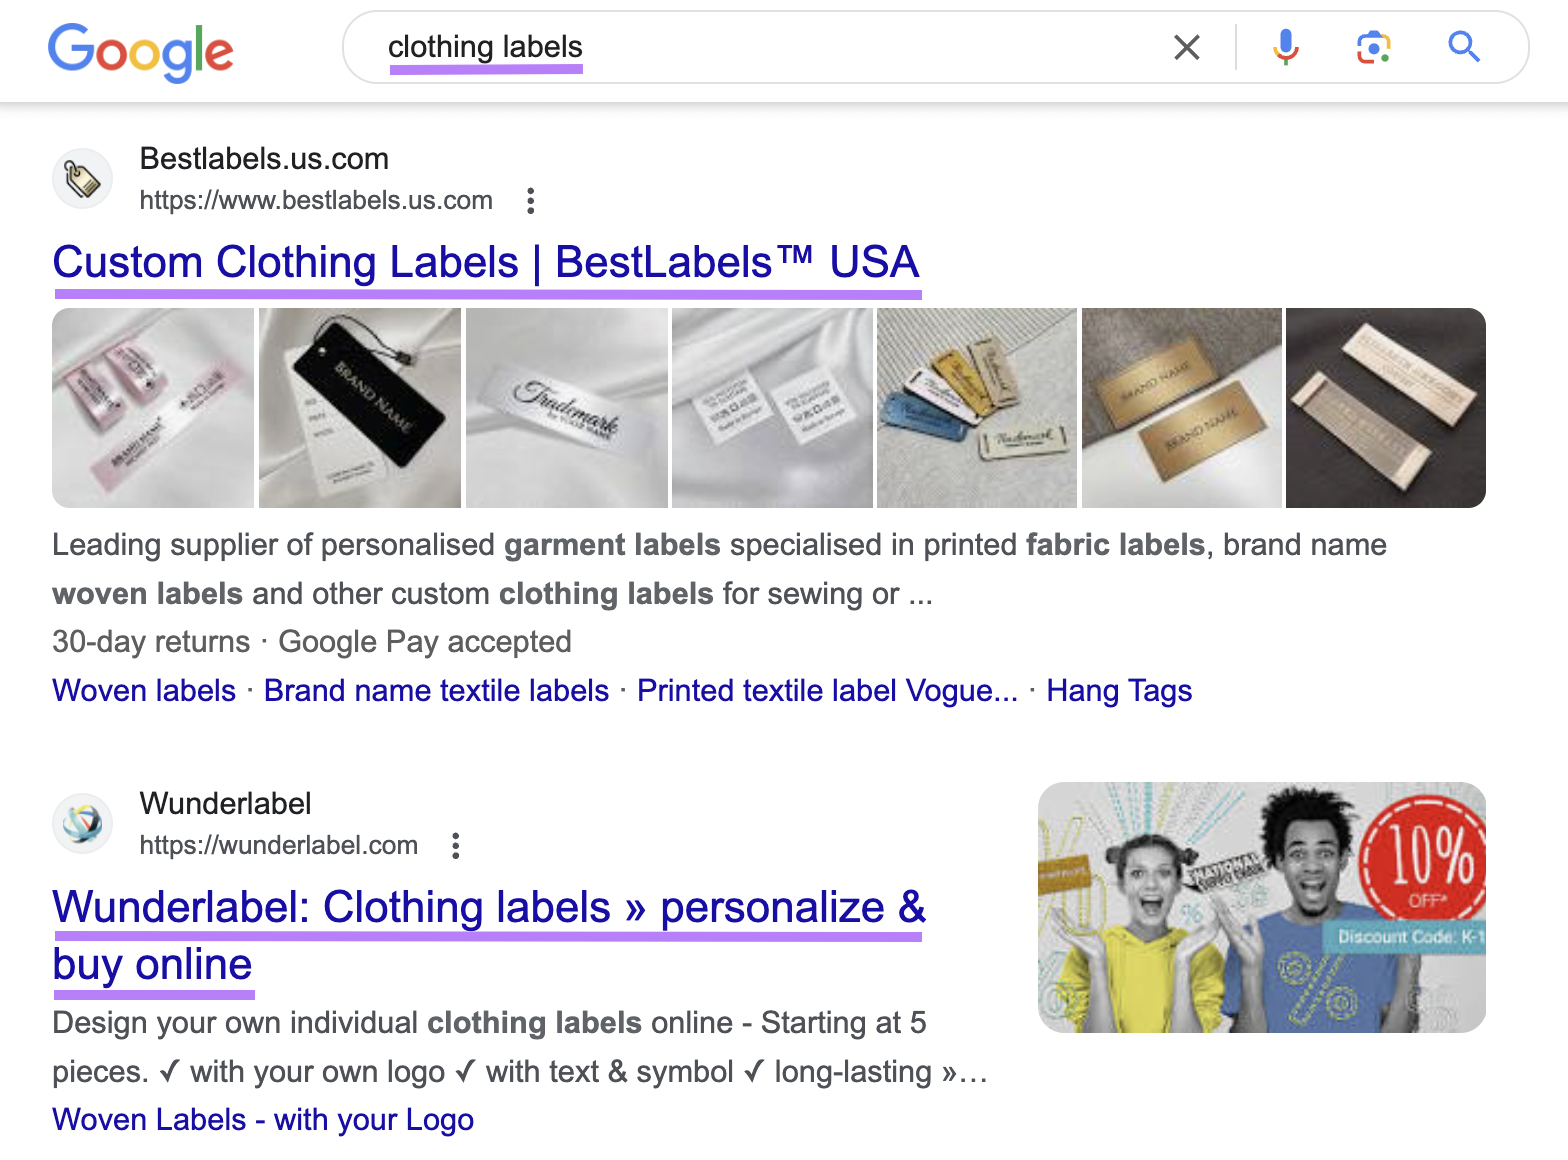 Google search results for “clothing labels” query